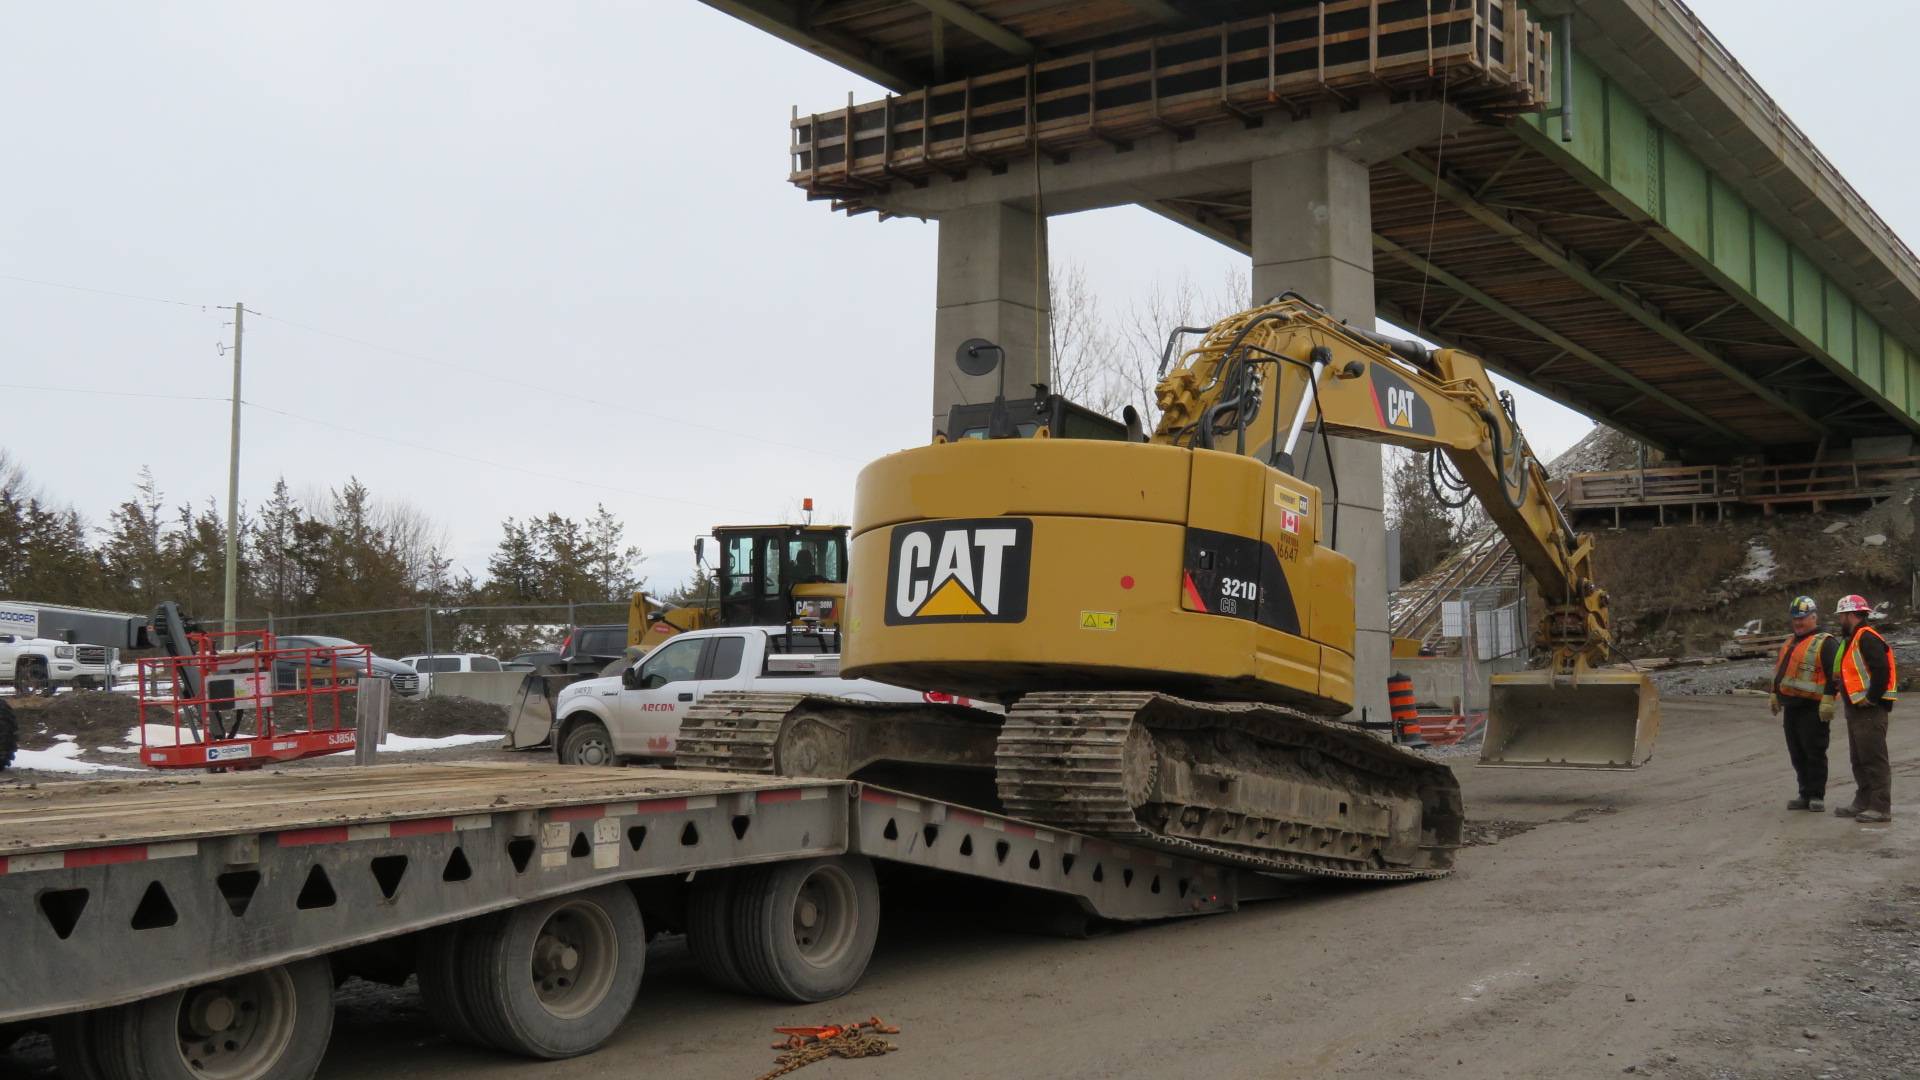 Delivering an excavator to the project site